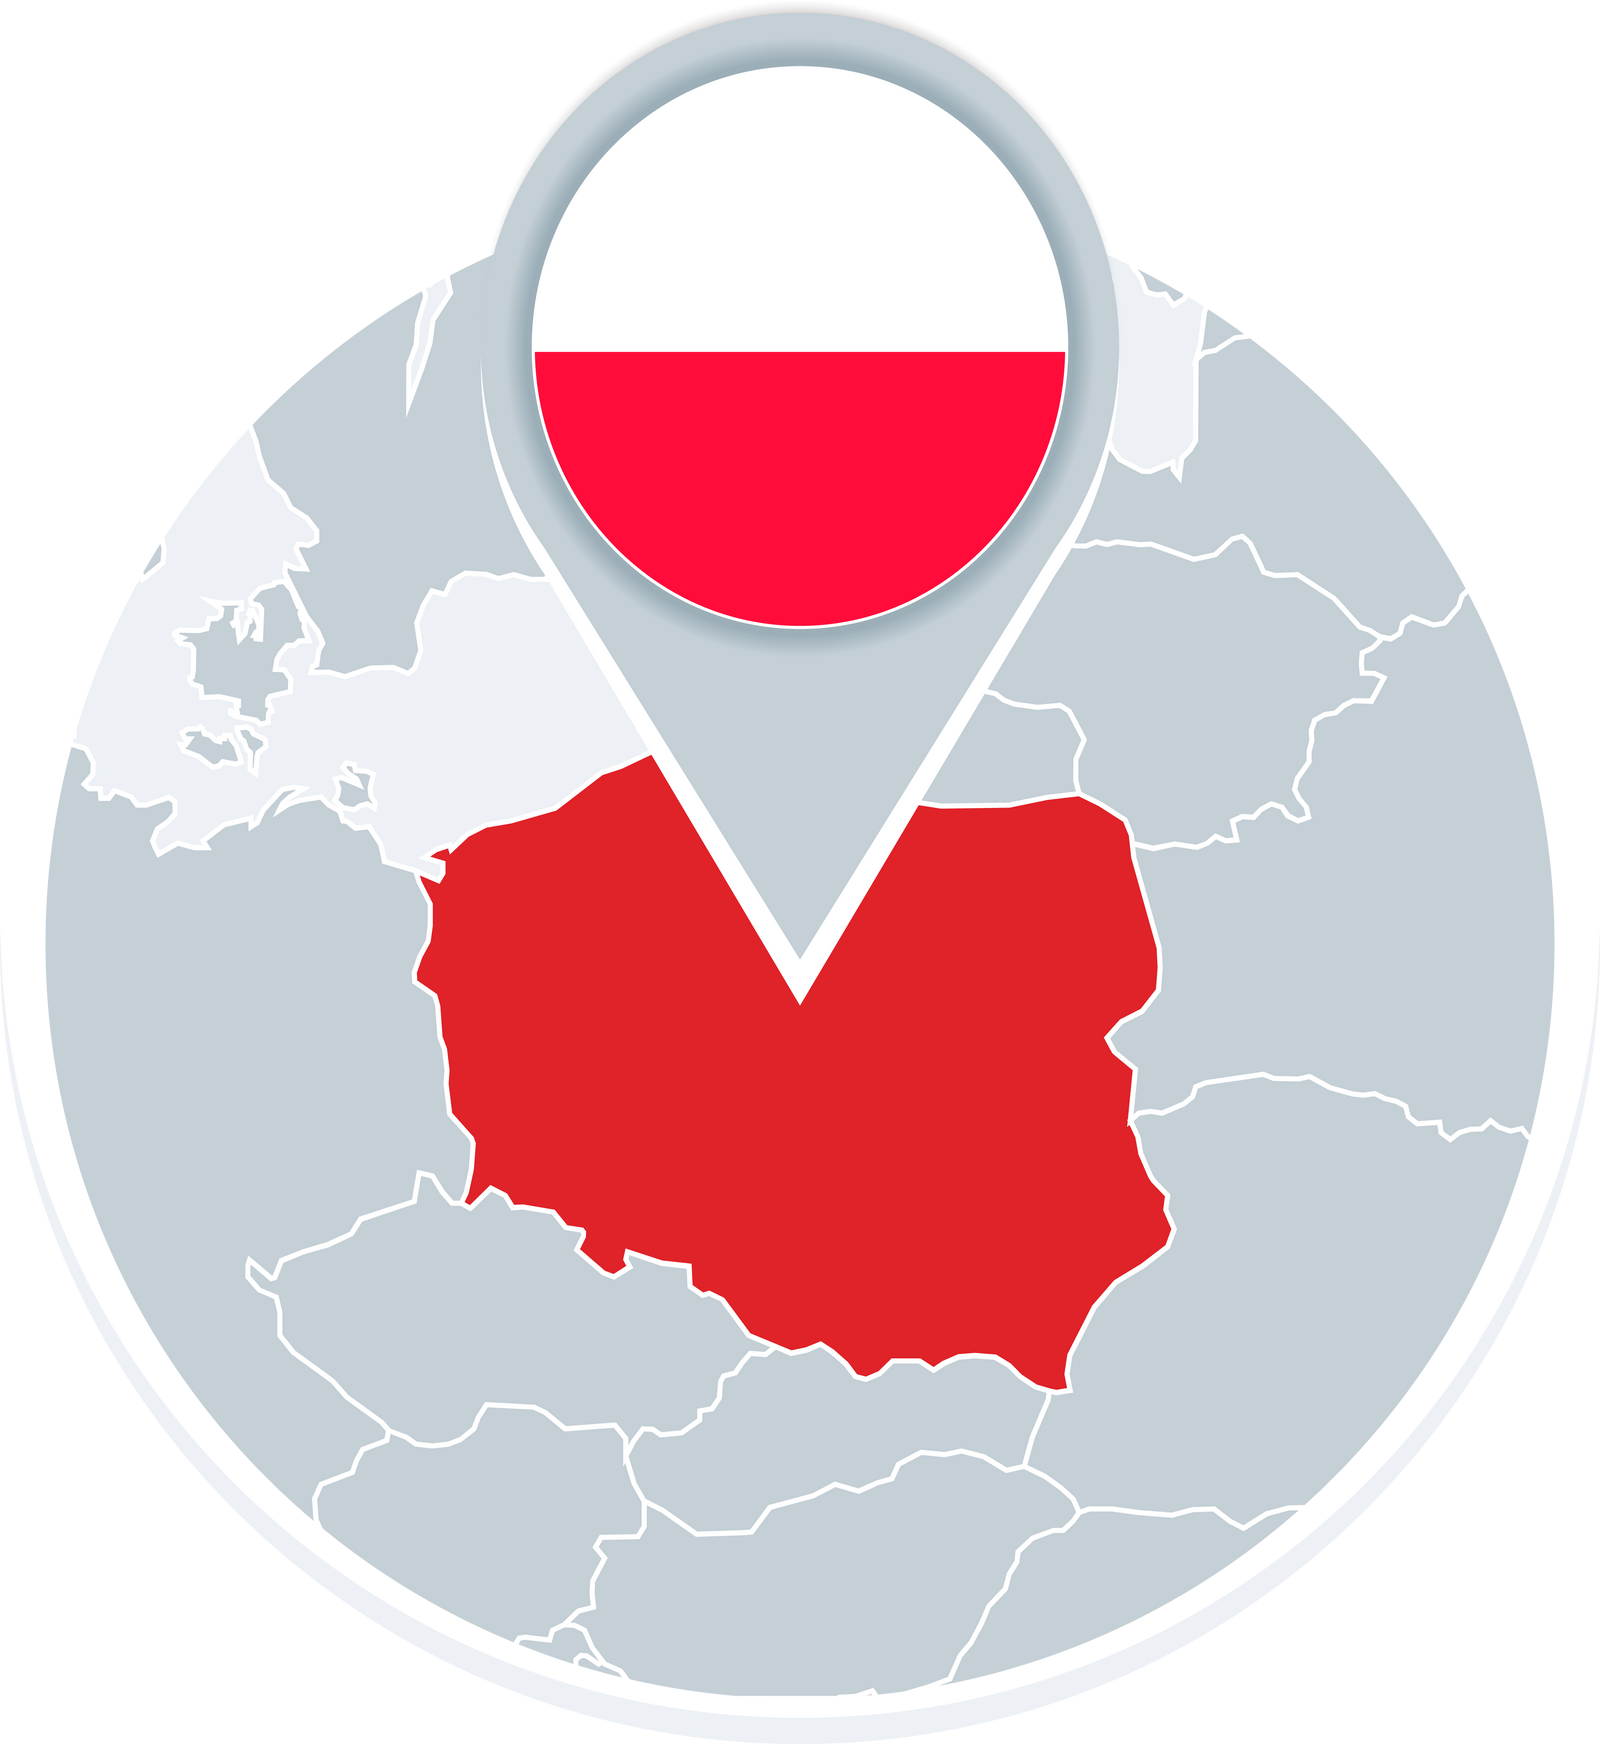 Poland map and flag, map icon with highlighted Poland